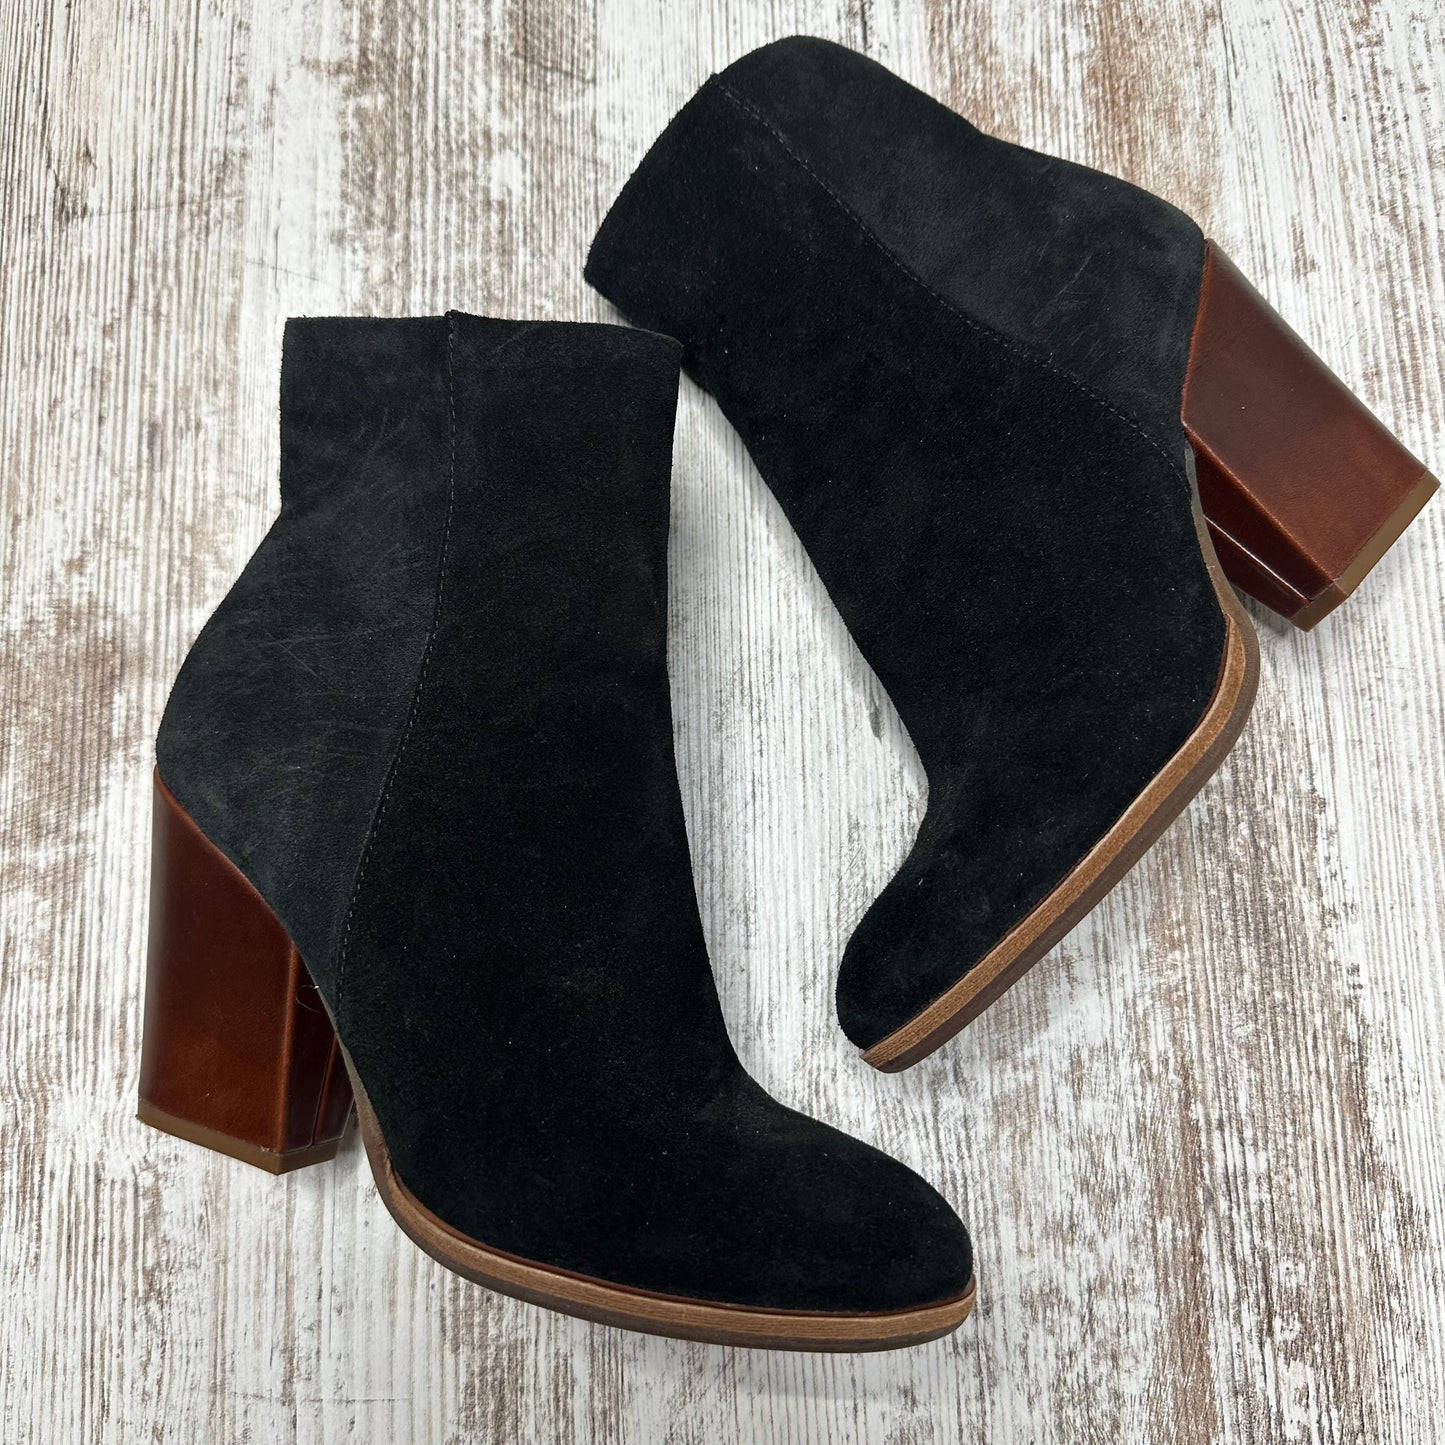 Kork-Ease Parr Suede Ankle Boots Booties Black Heeled 6